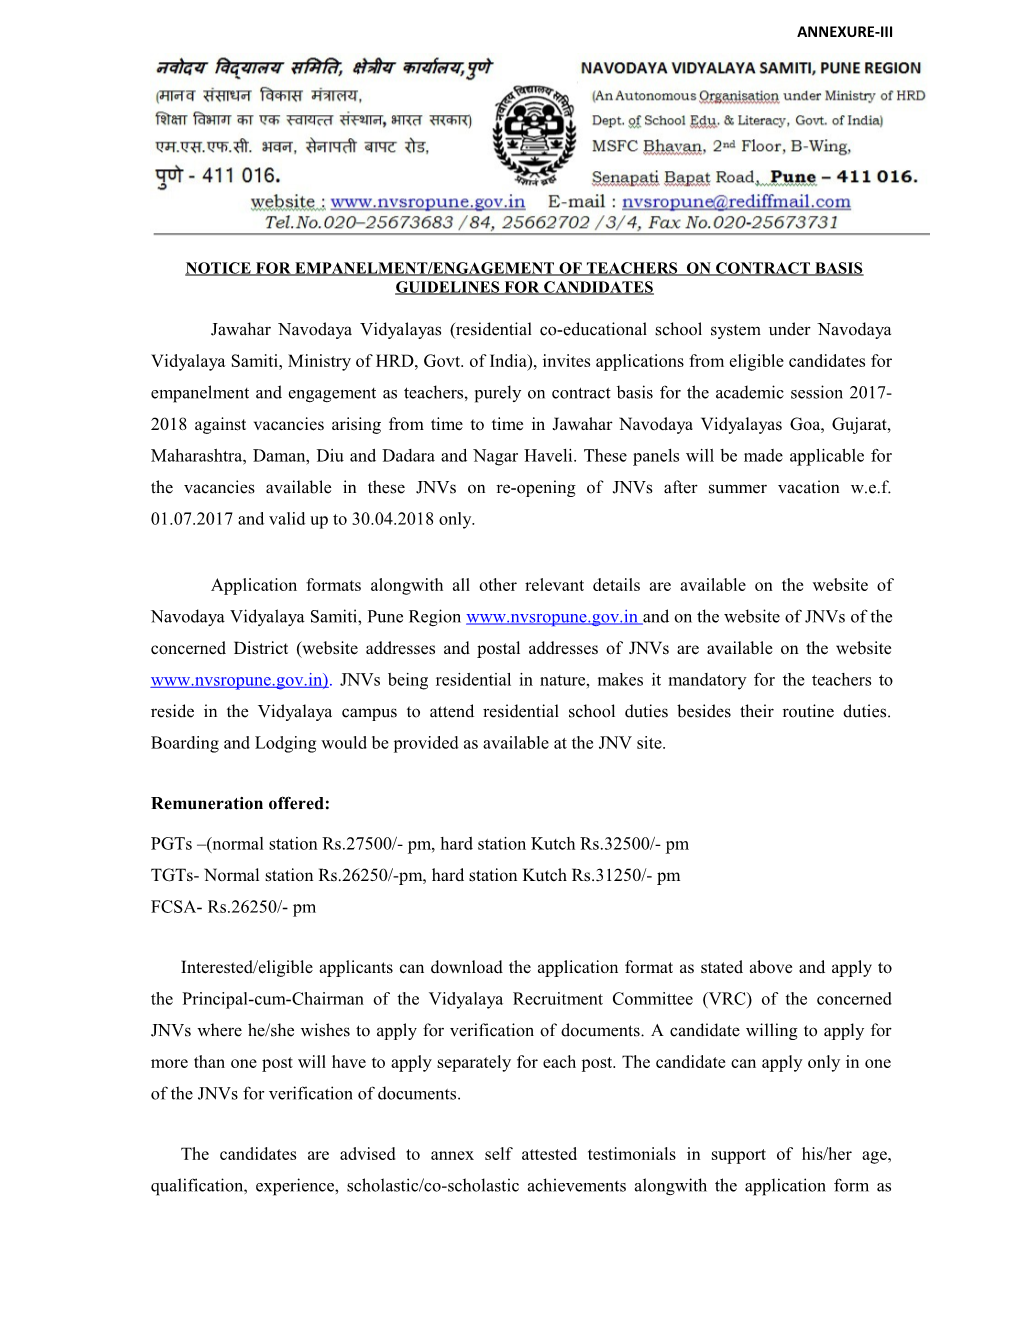 Notice for Empanelment/Engagement of Teachers on Contract Basis Guidelines for Candidates